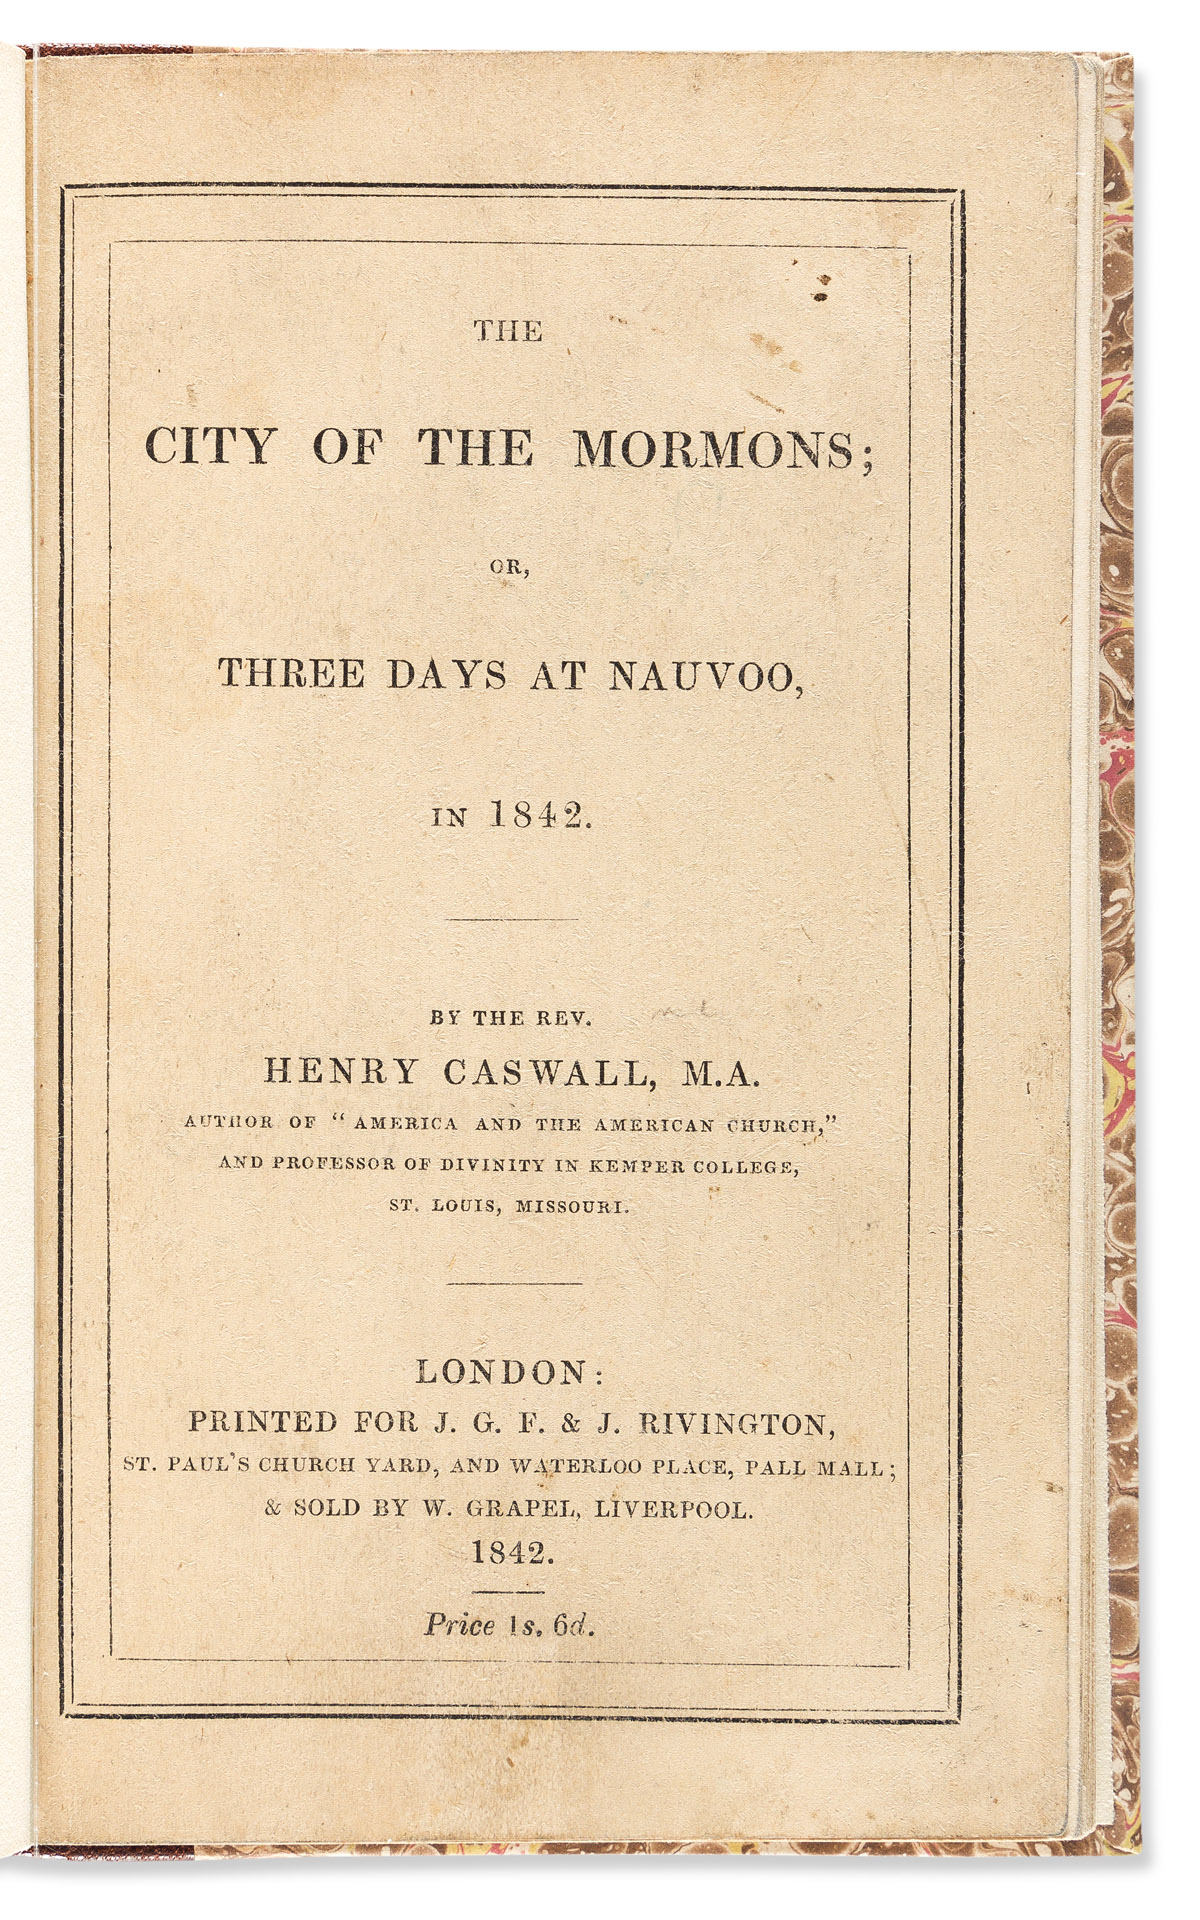 (MORMONS.) Henry Caswall. City of the Mormons, or, Three Days at Nauvoo.